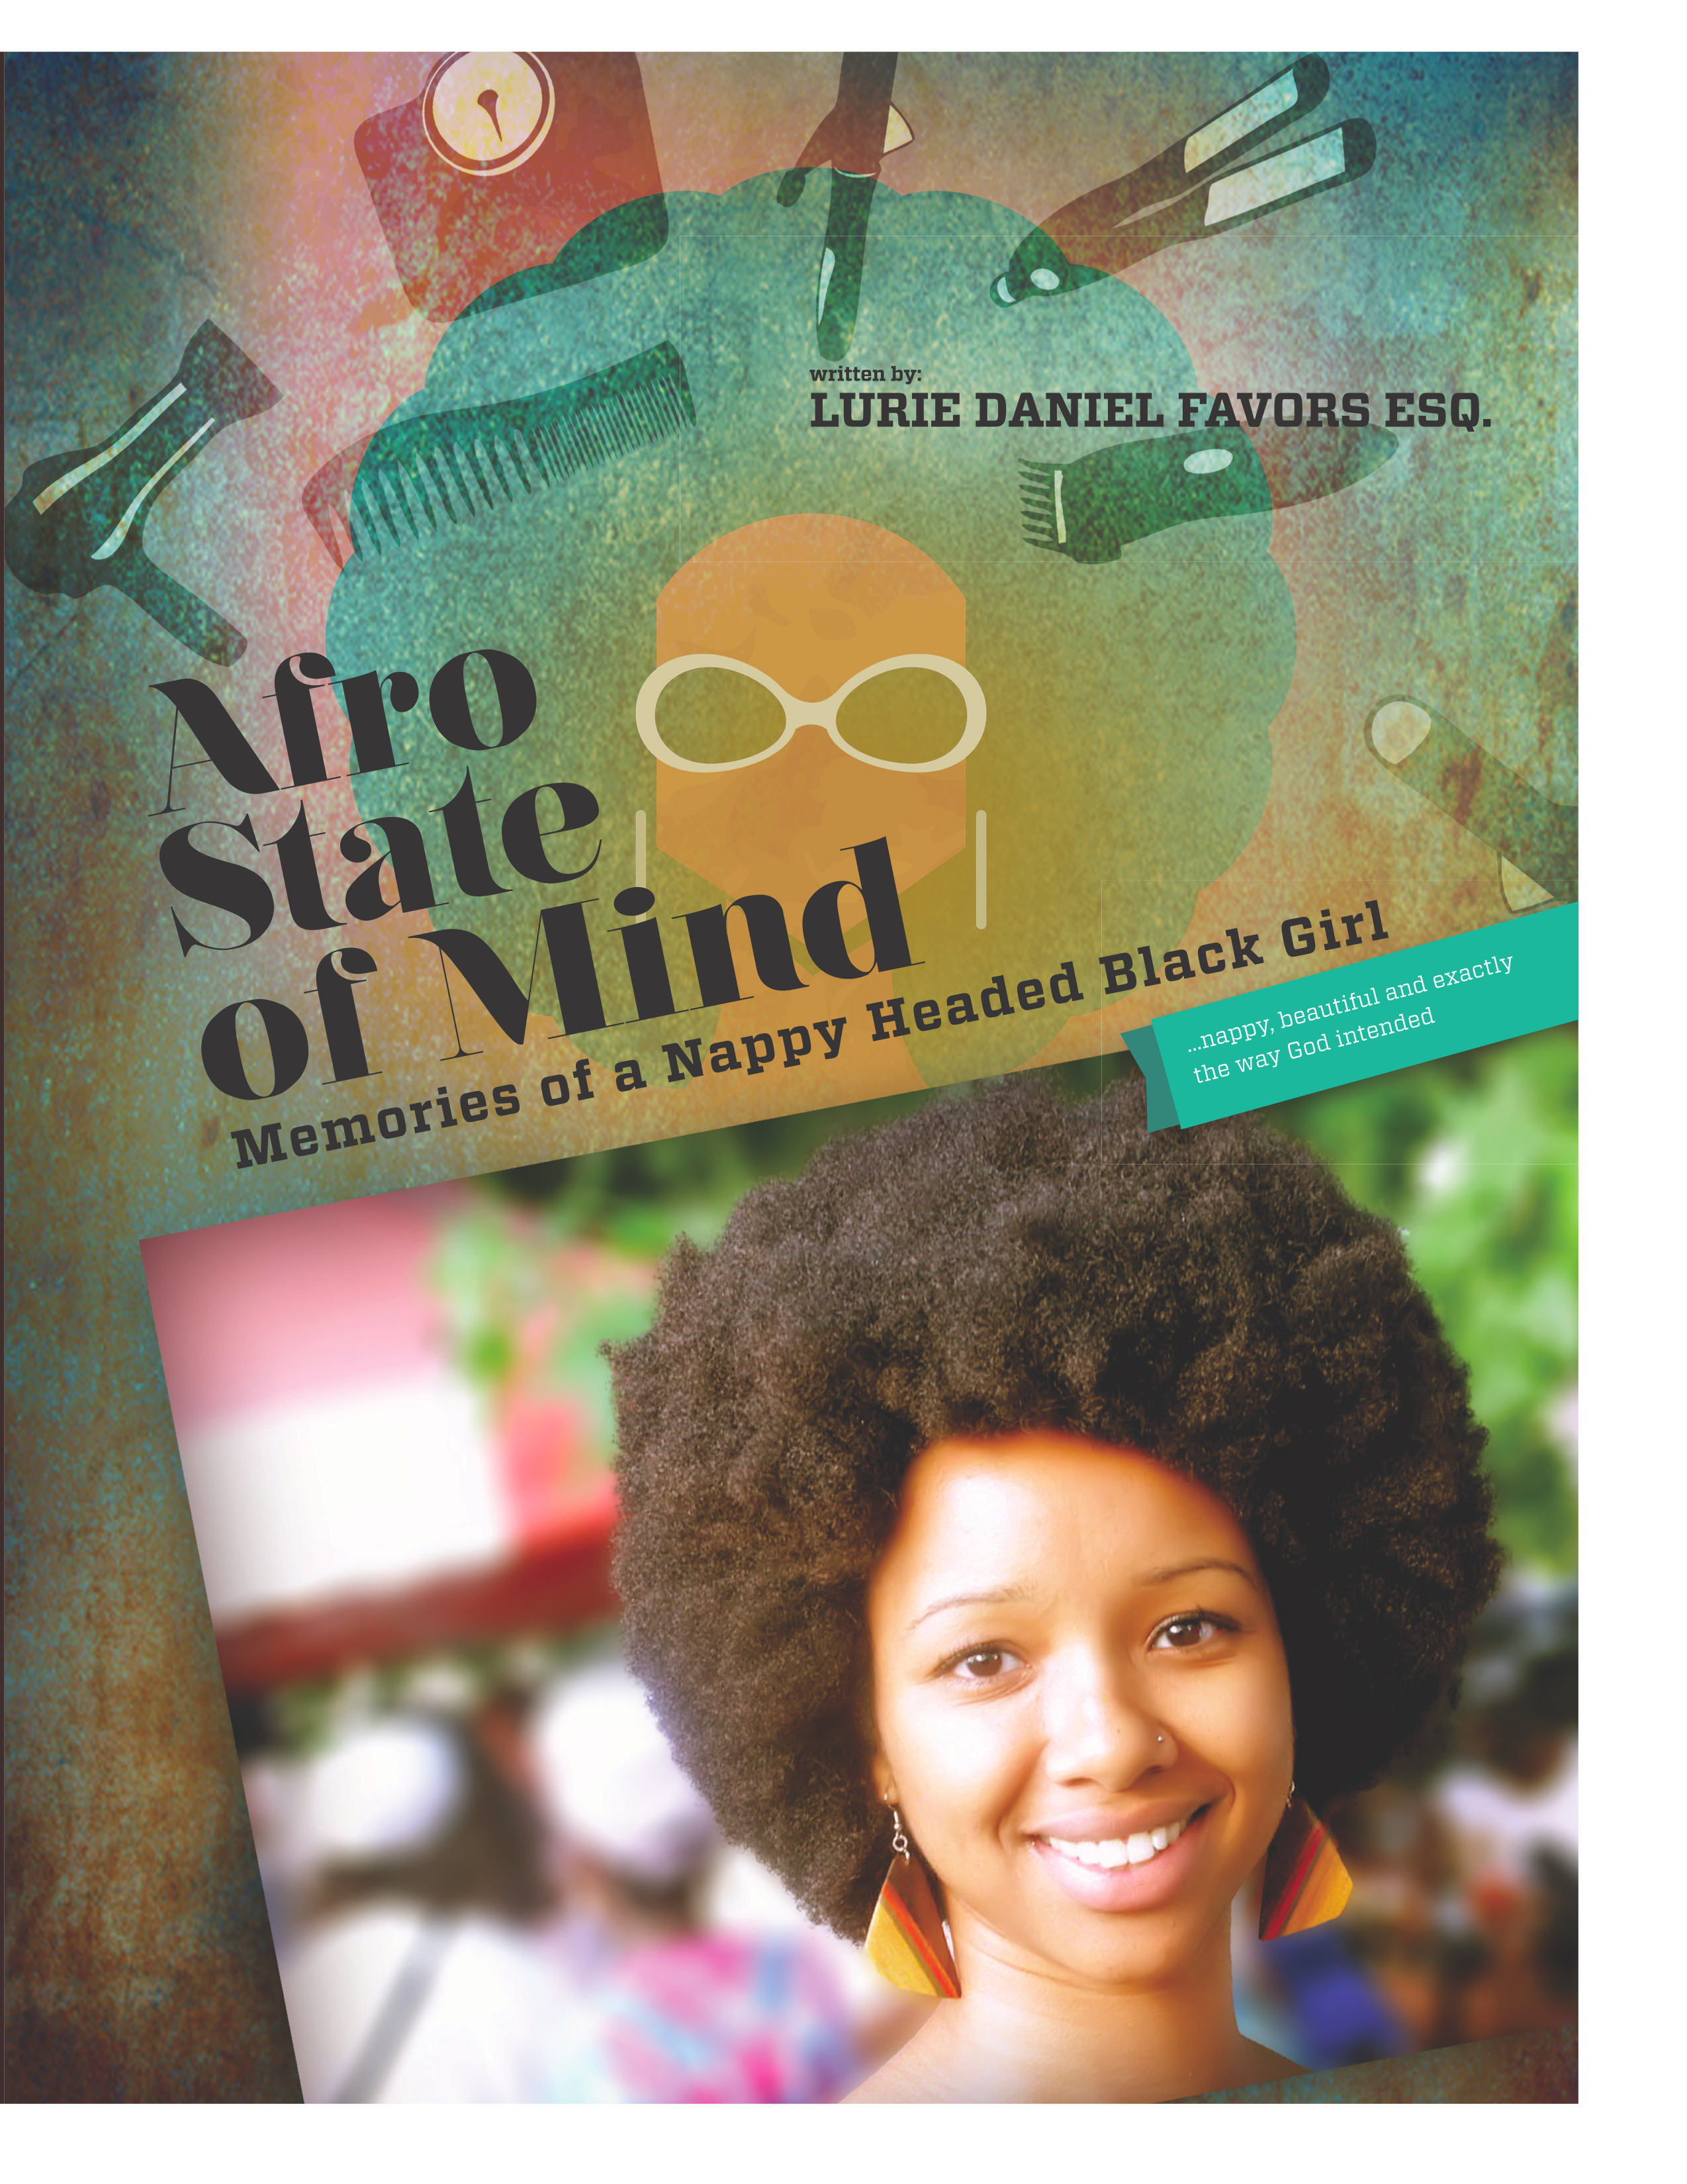 Book Release Event: Afro State of Mind – Memories of a Nappy Headed Black Girl